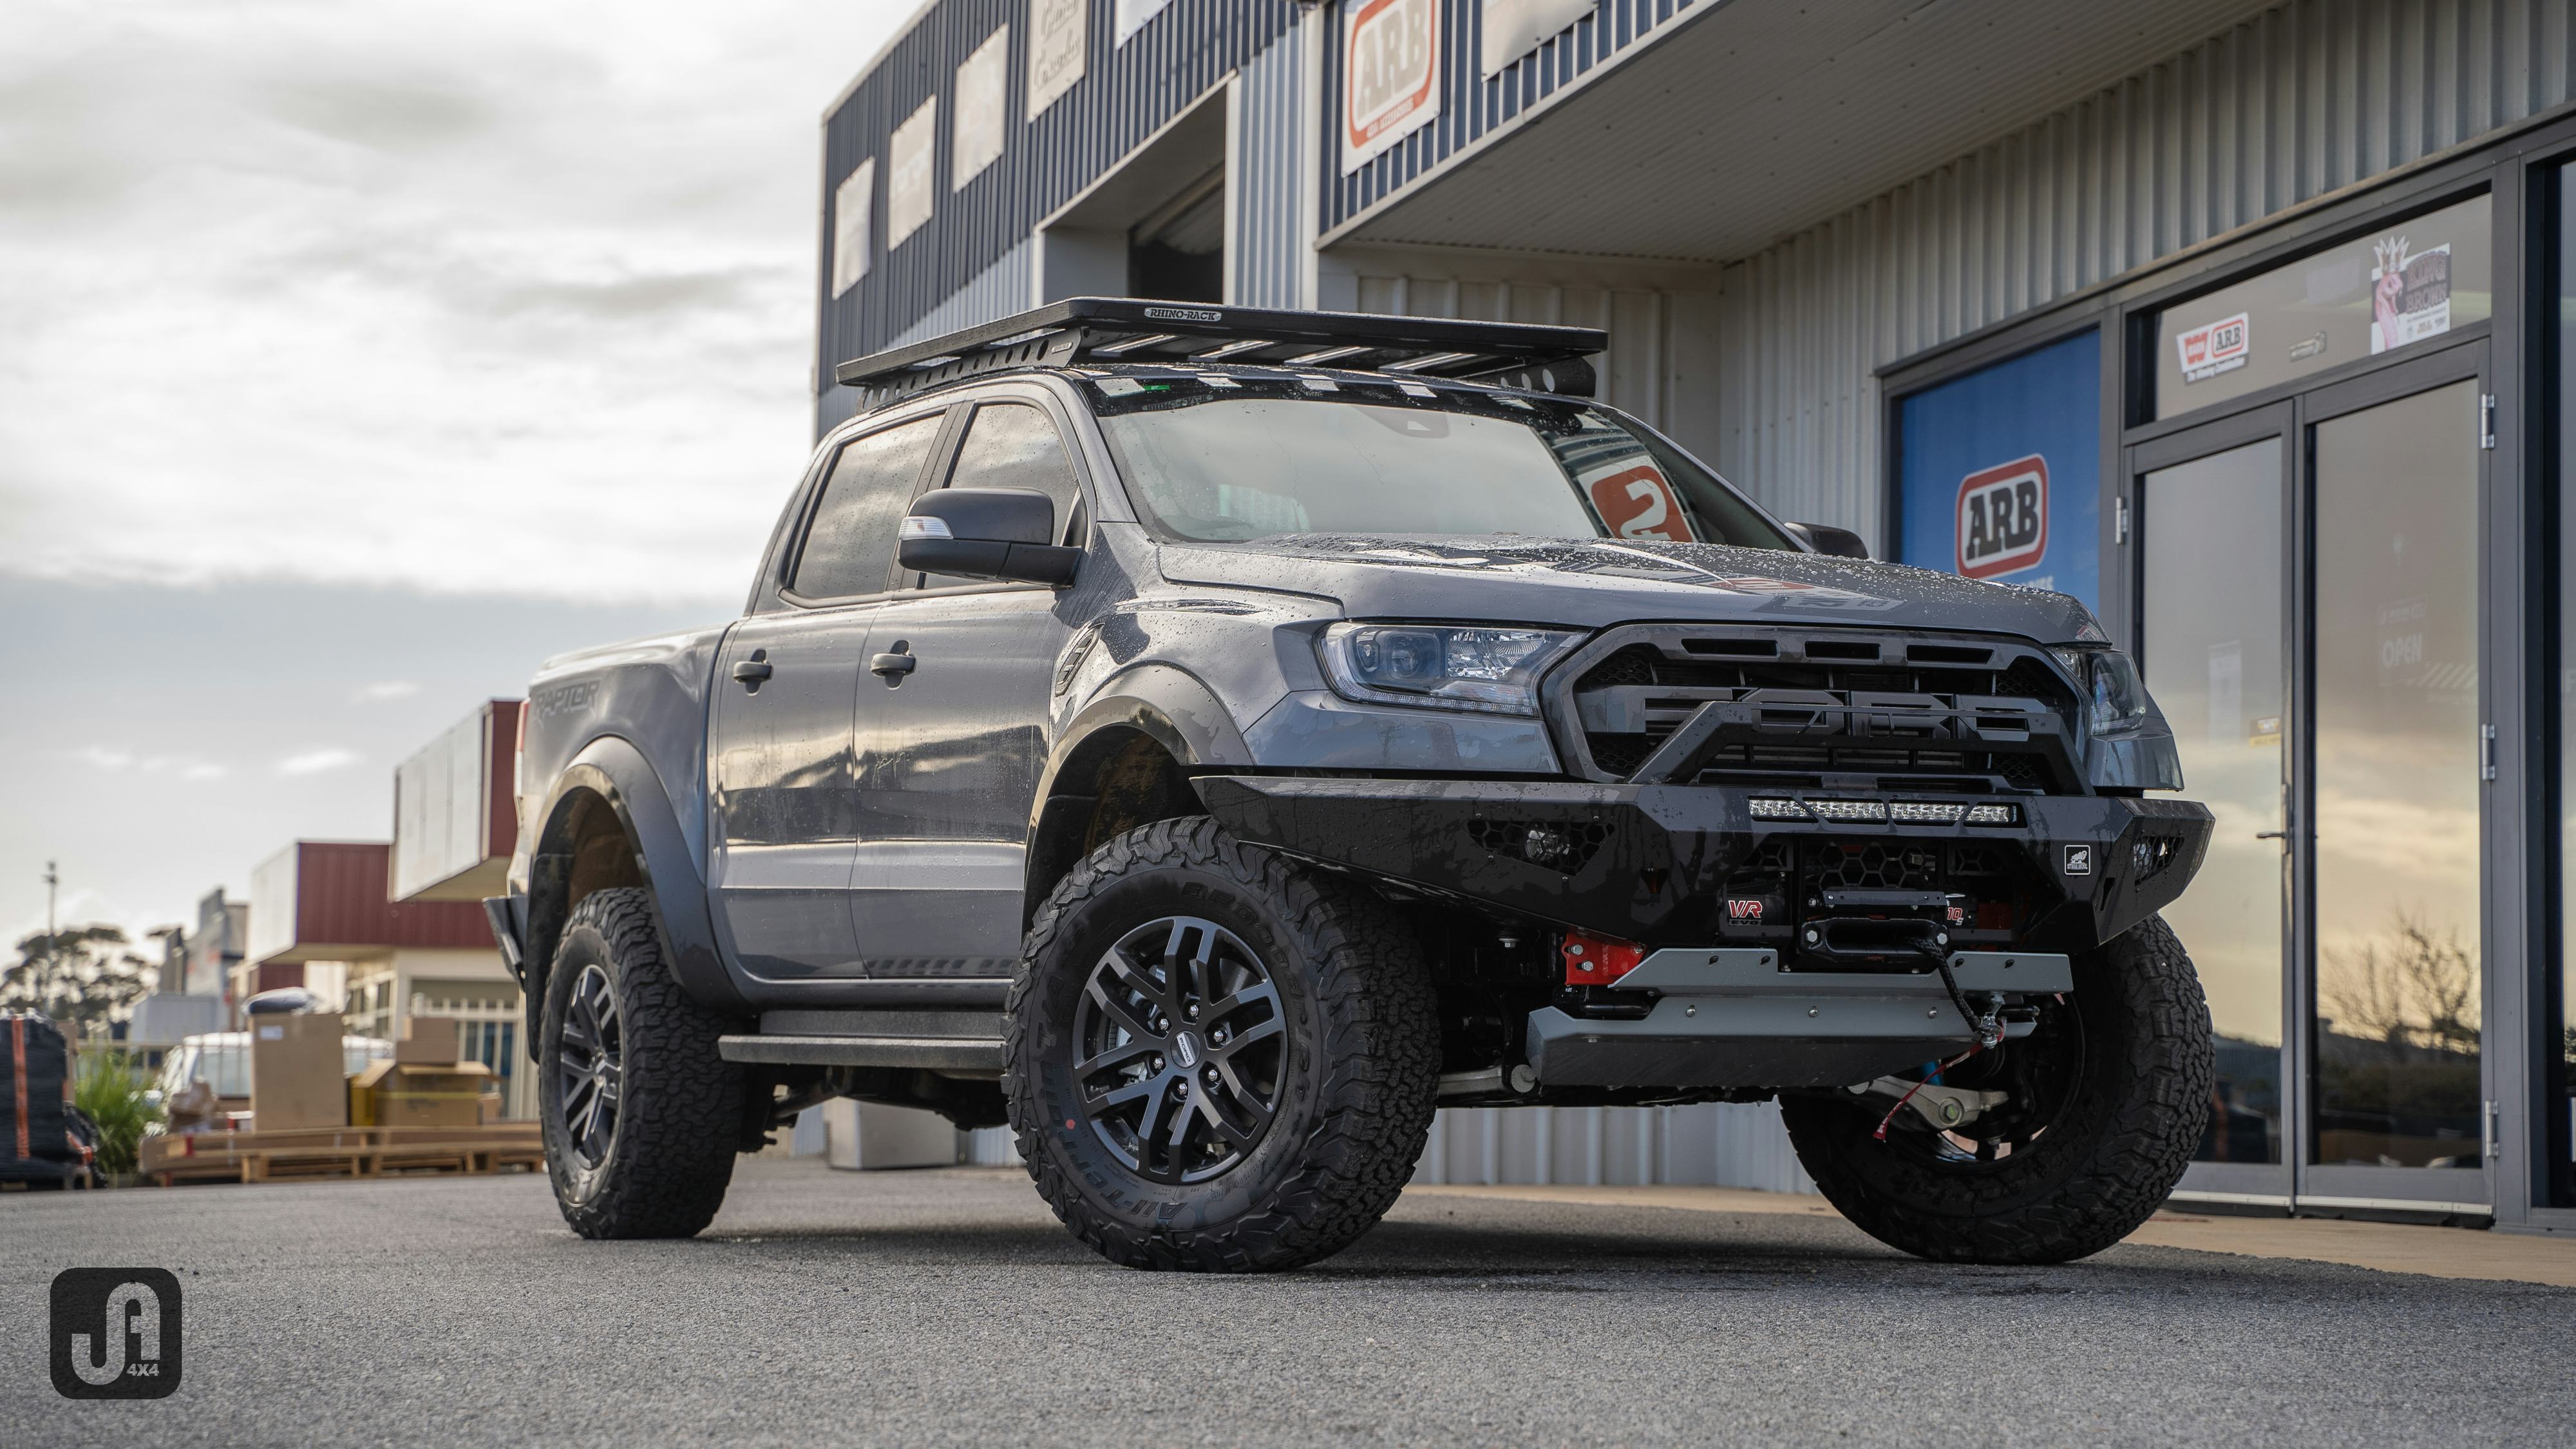 Chris' Ford Ranger Raptor - Jacksons 4x4 Fit Outs